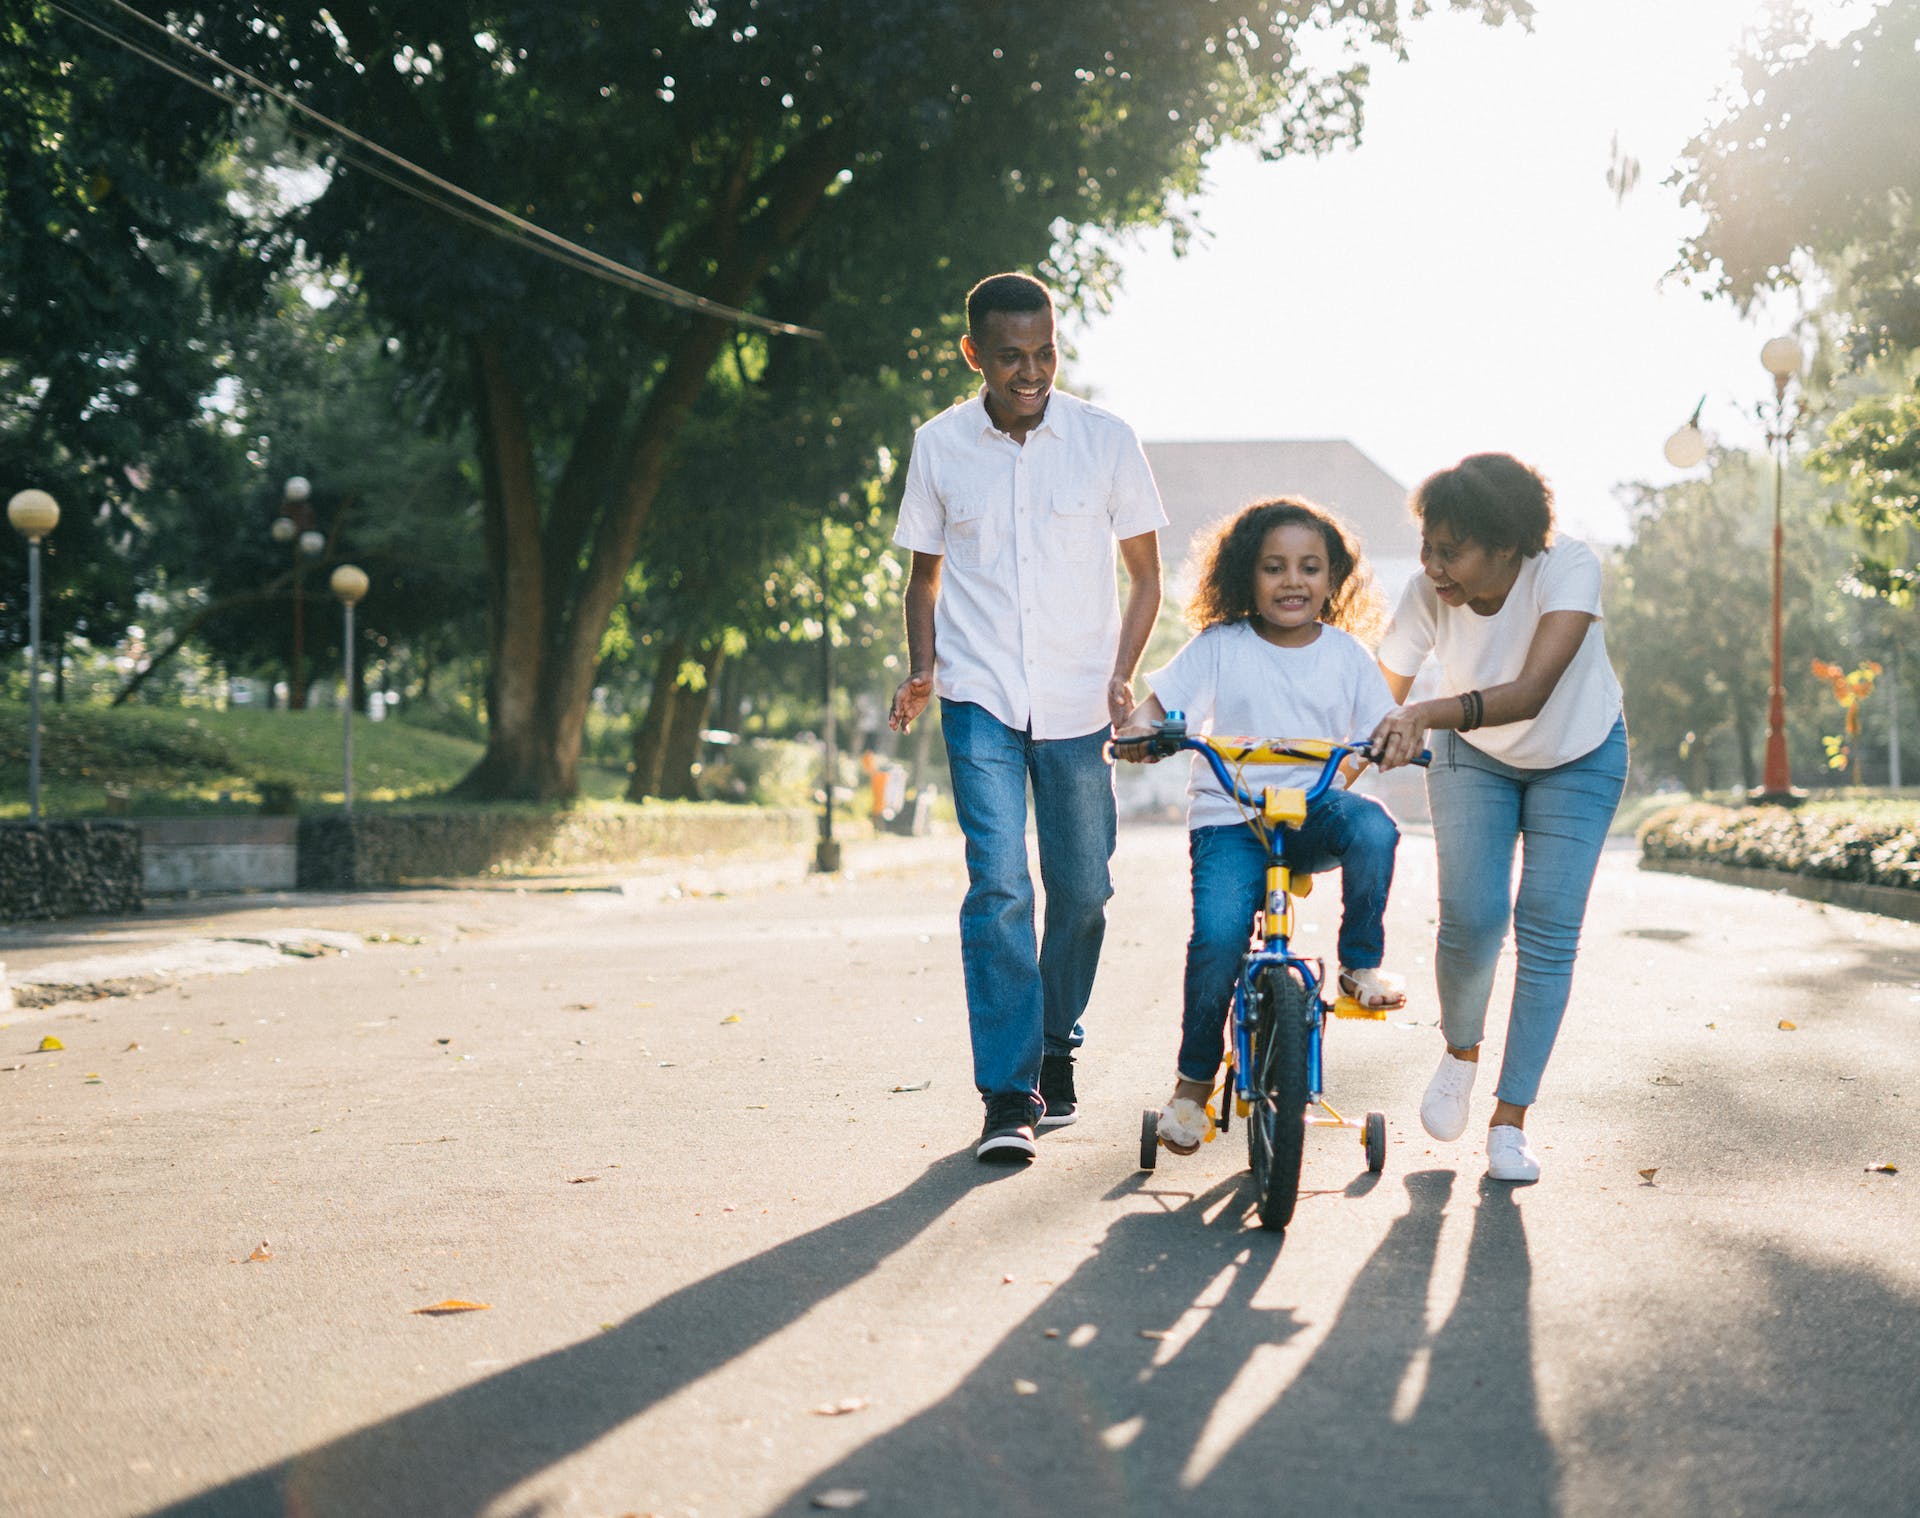 A couple teaching a girl how to ride a bicycle | Source: Pexels